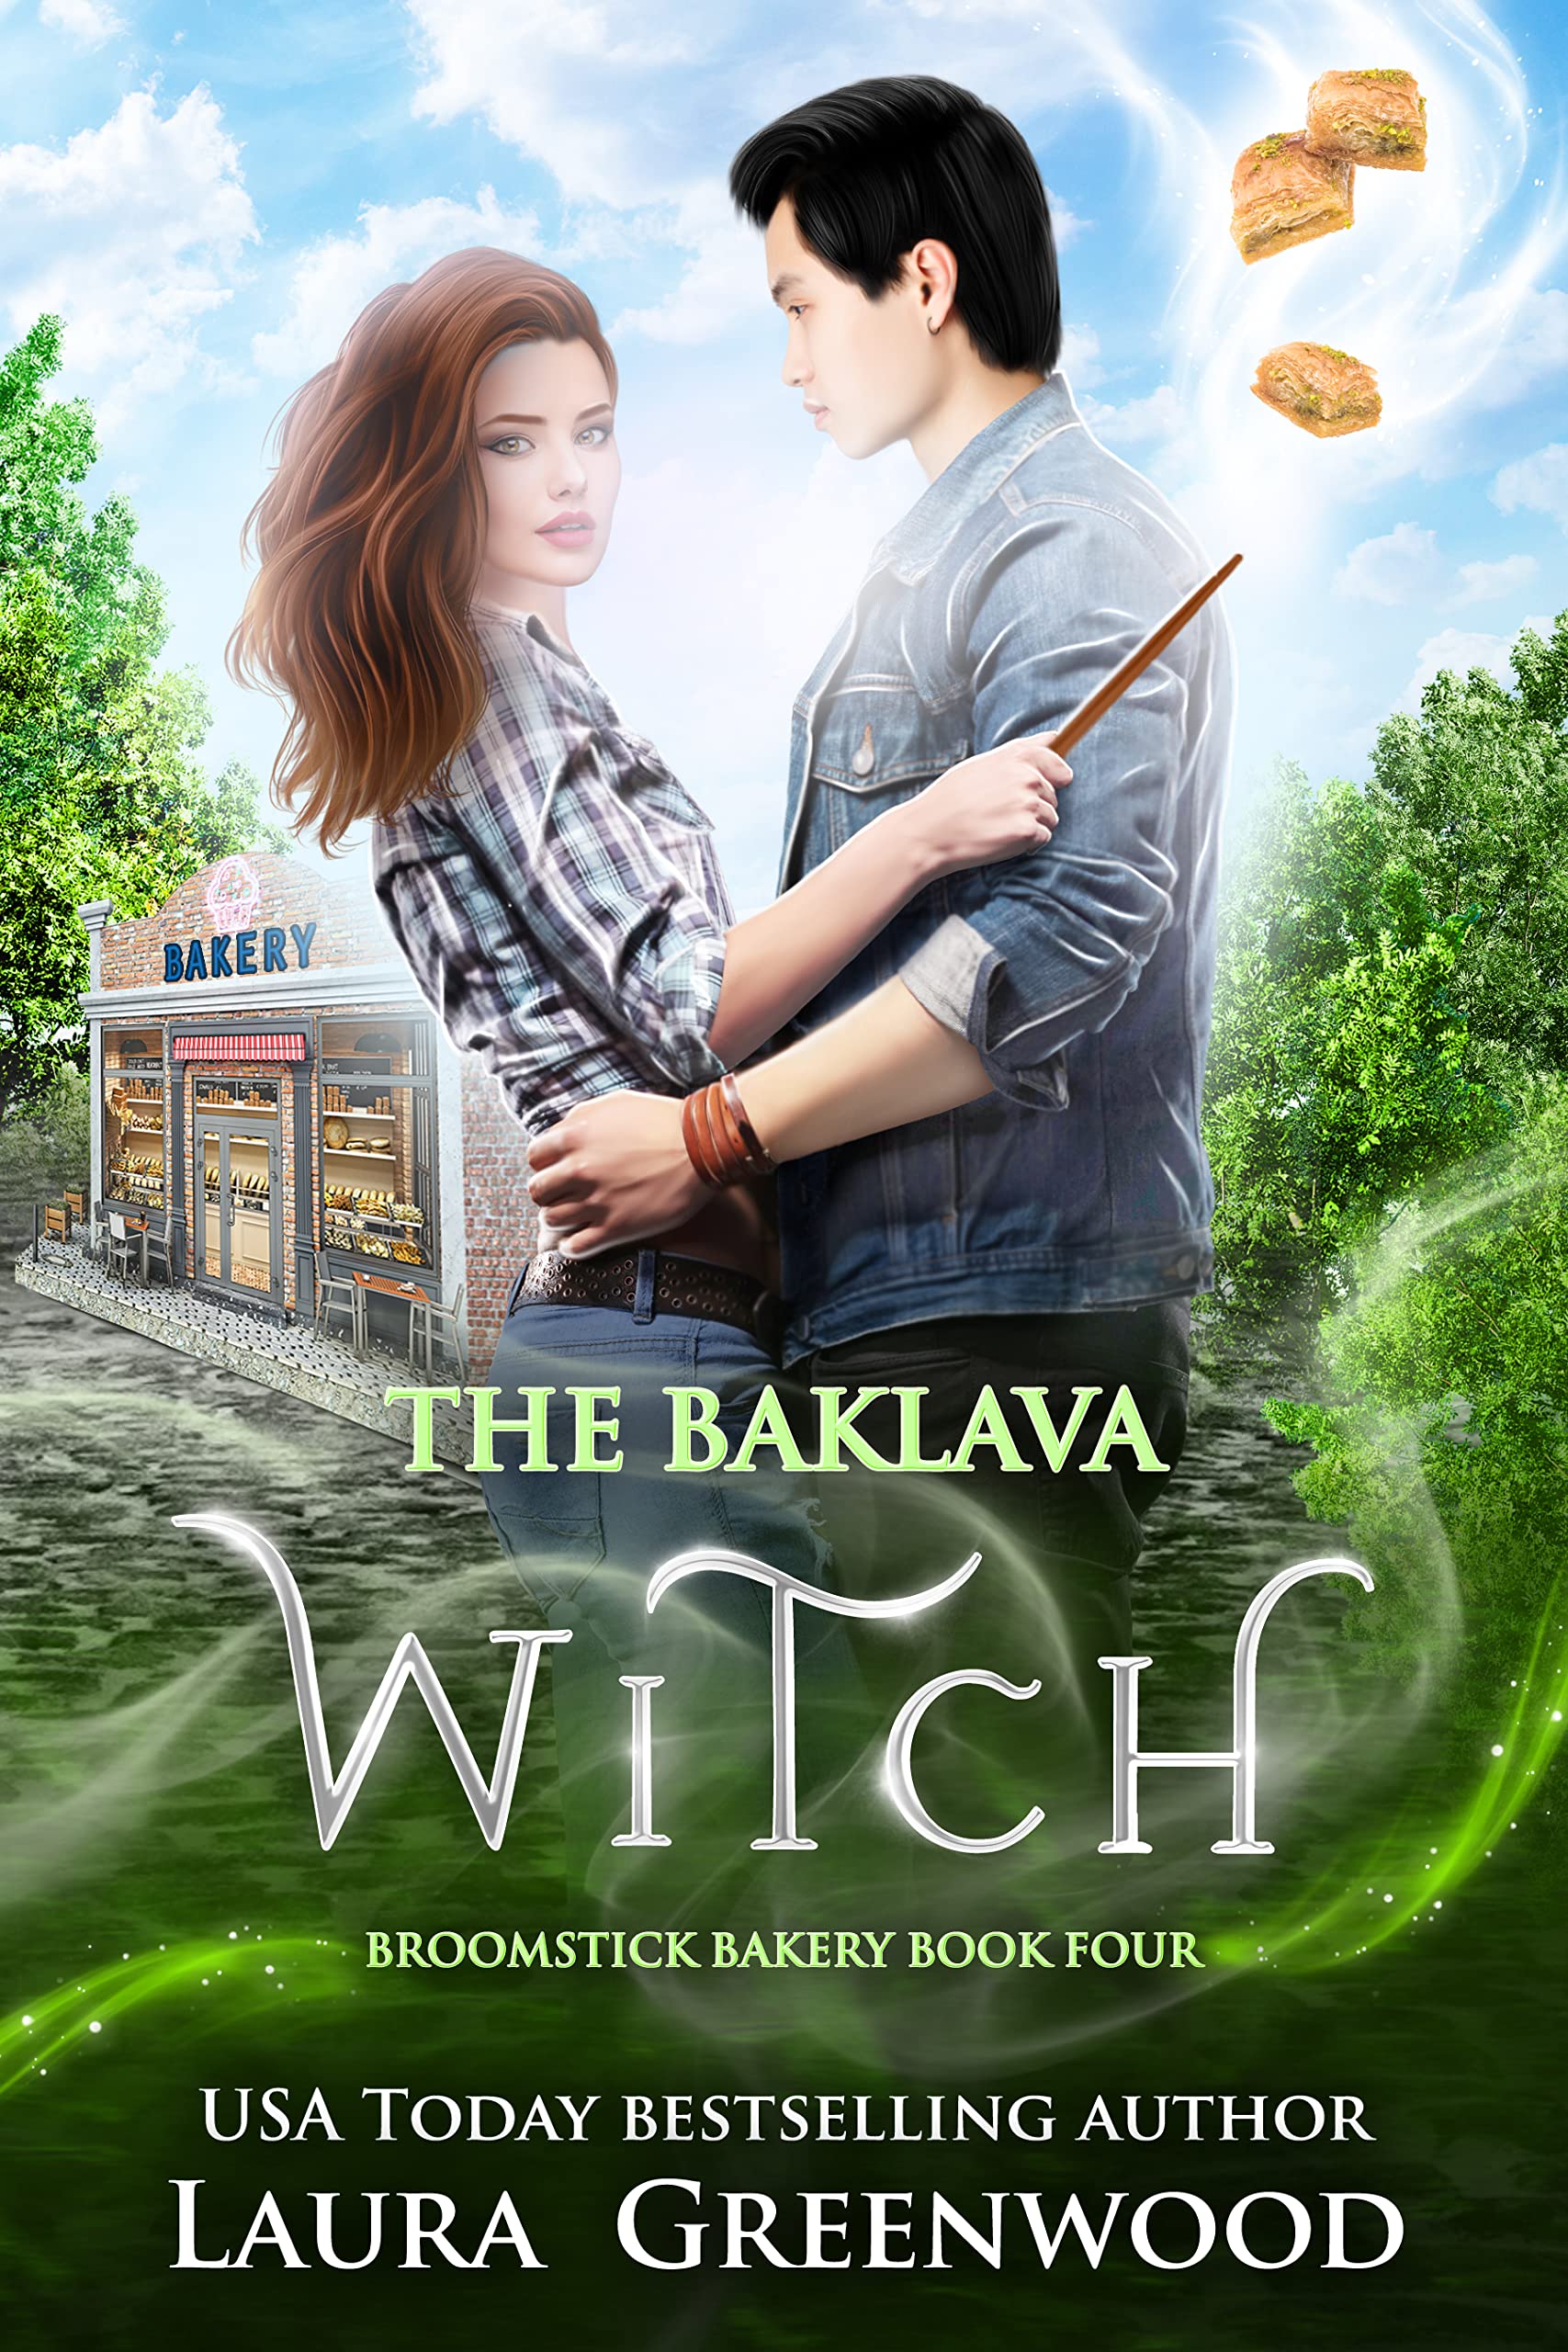 The Baklava Witch by Laura Greenwood PDF Download